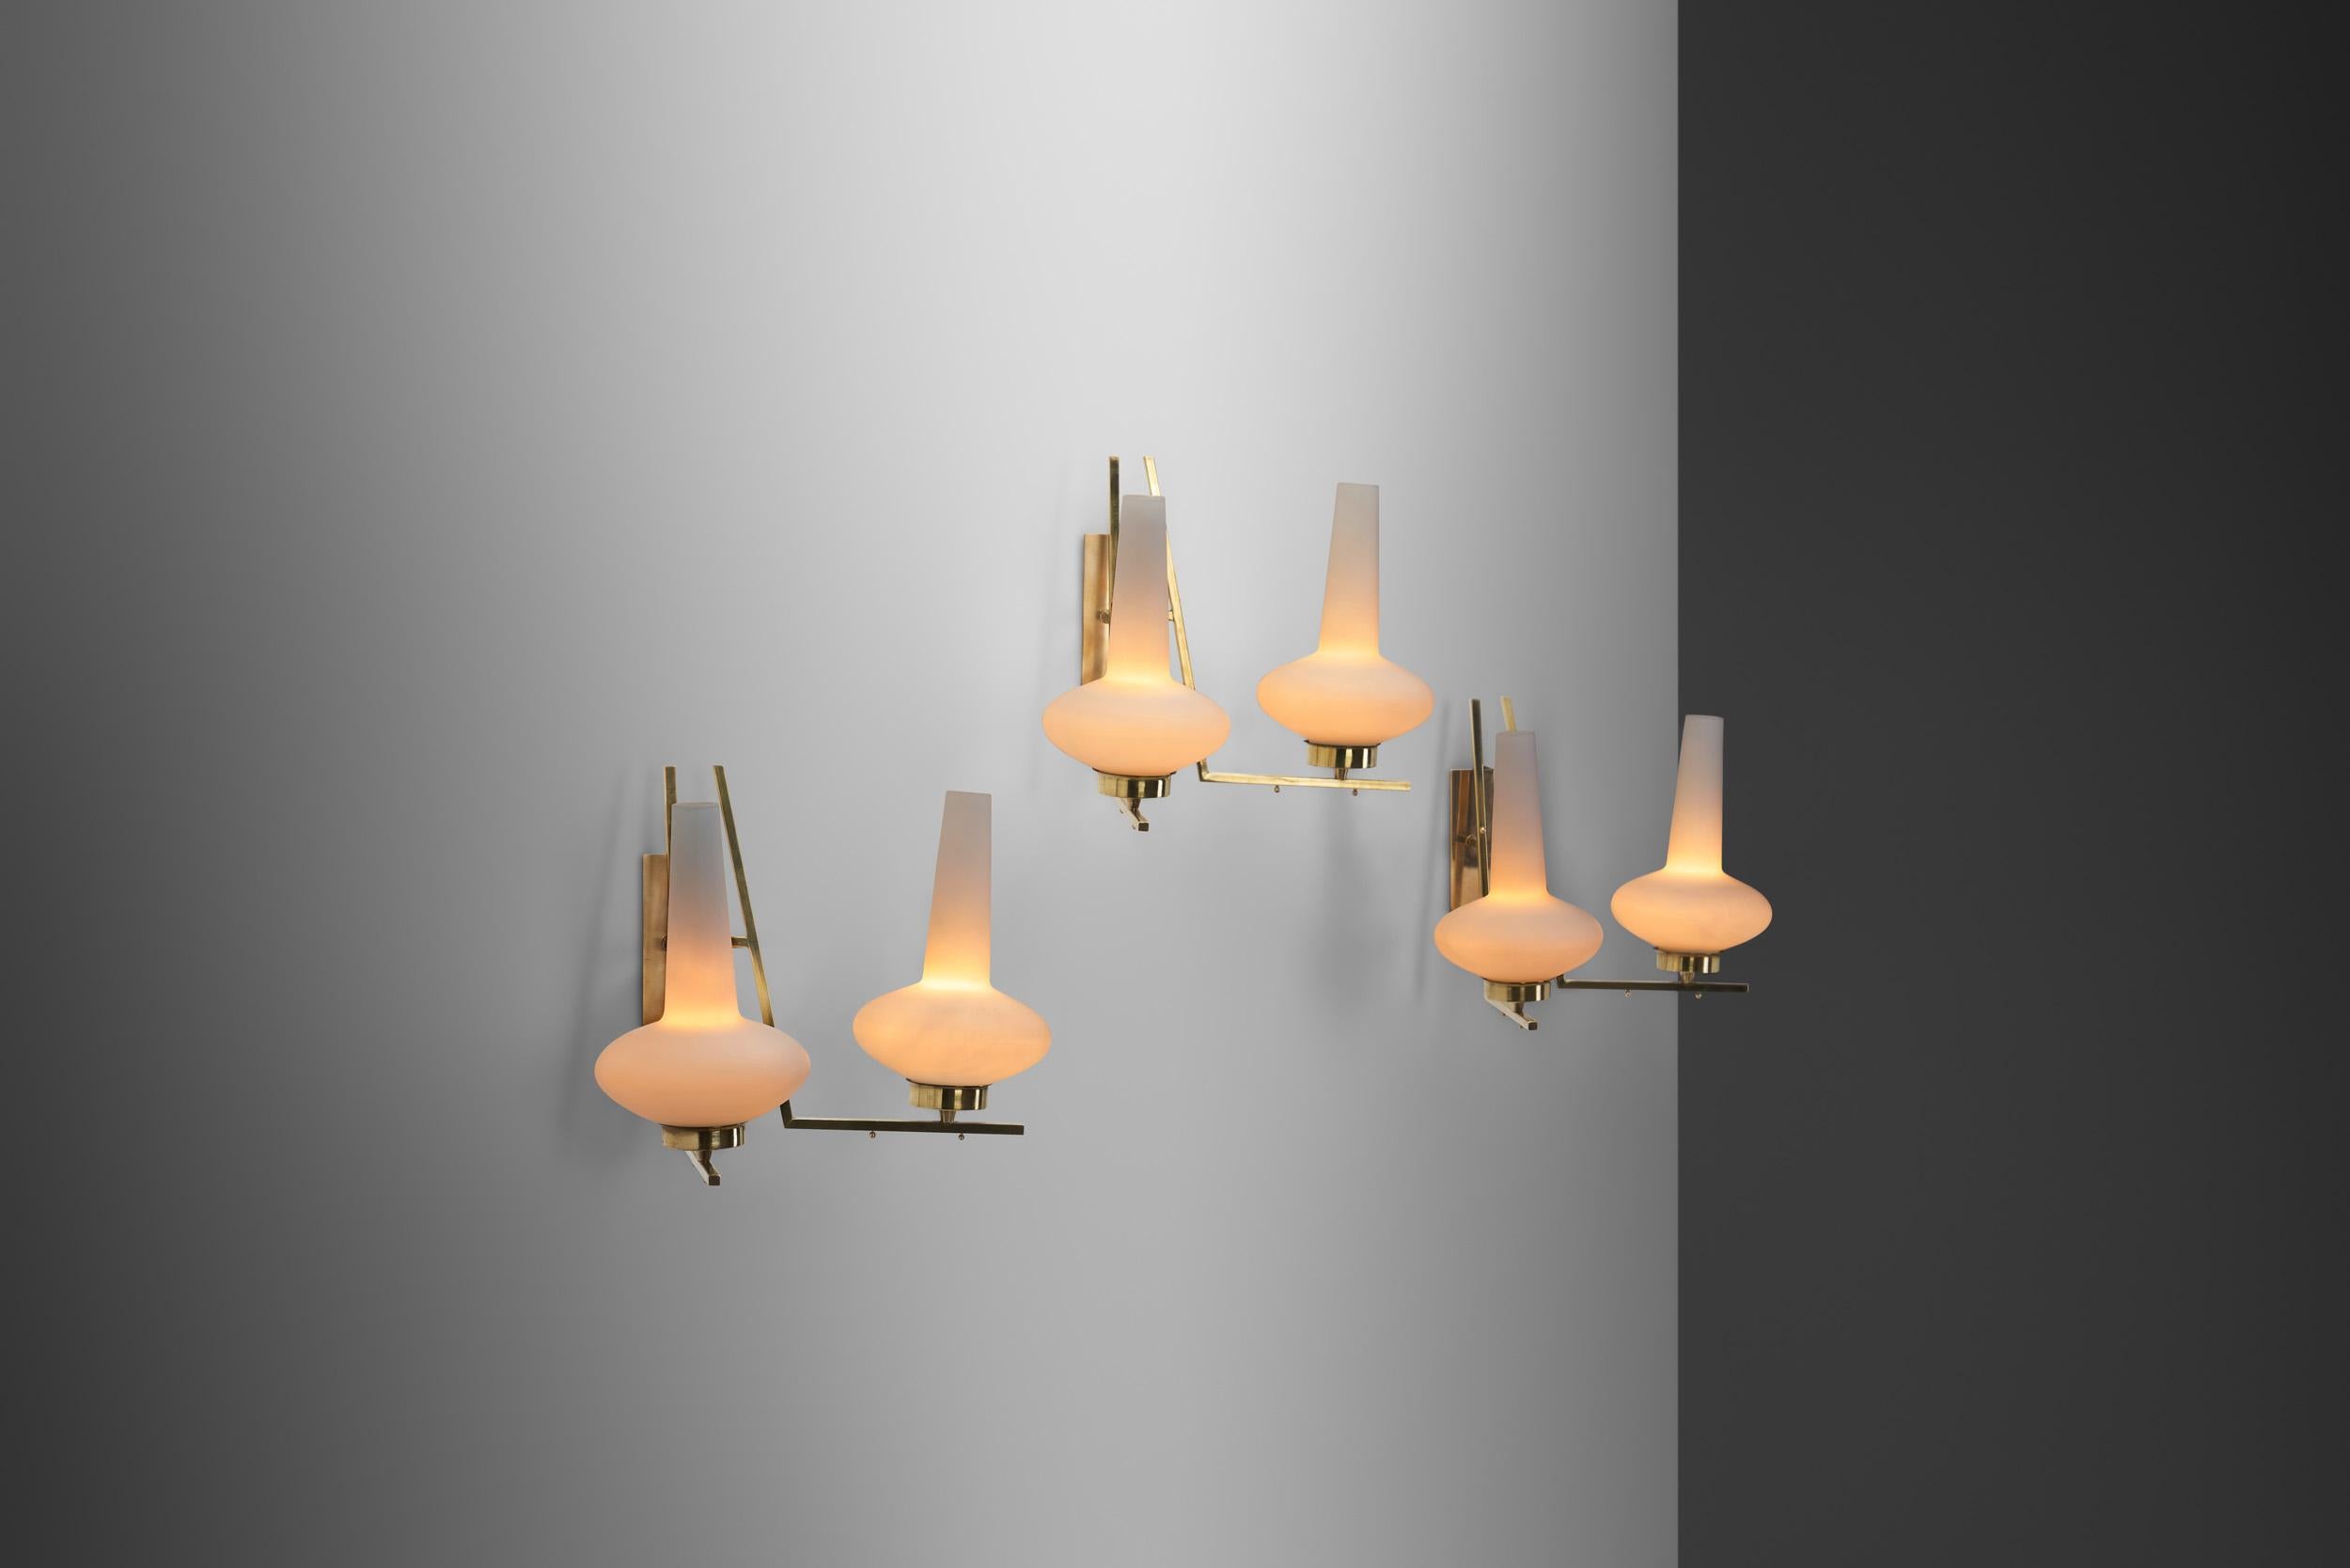 Italian Mid-20th century lighting design was infinitely captivating, featuring one-of-a-kind models crafted by renowned Italian designers such as Ettore Sottsass, Gio Ponti, Gavina and other internationally esteemed names. As these wall lamps show,